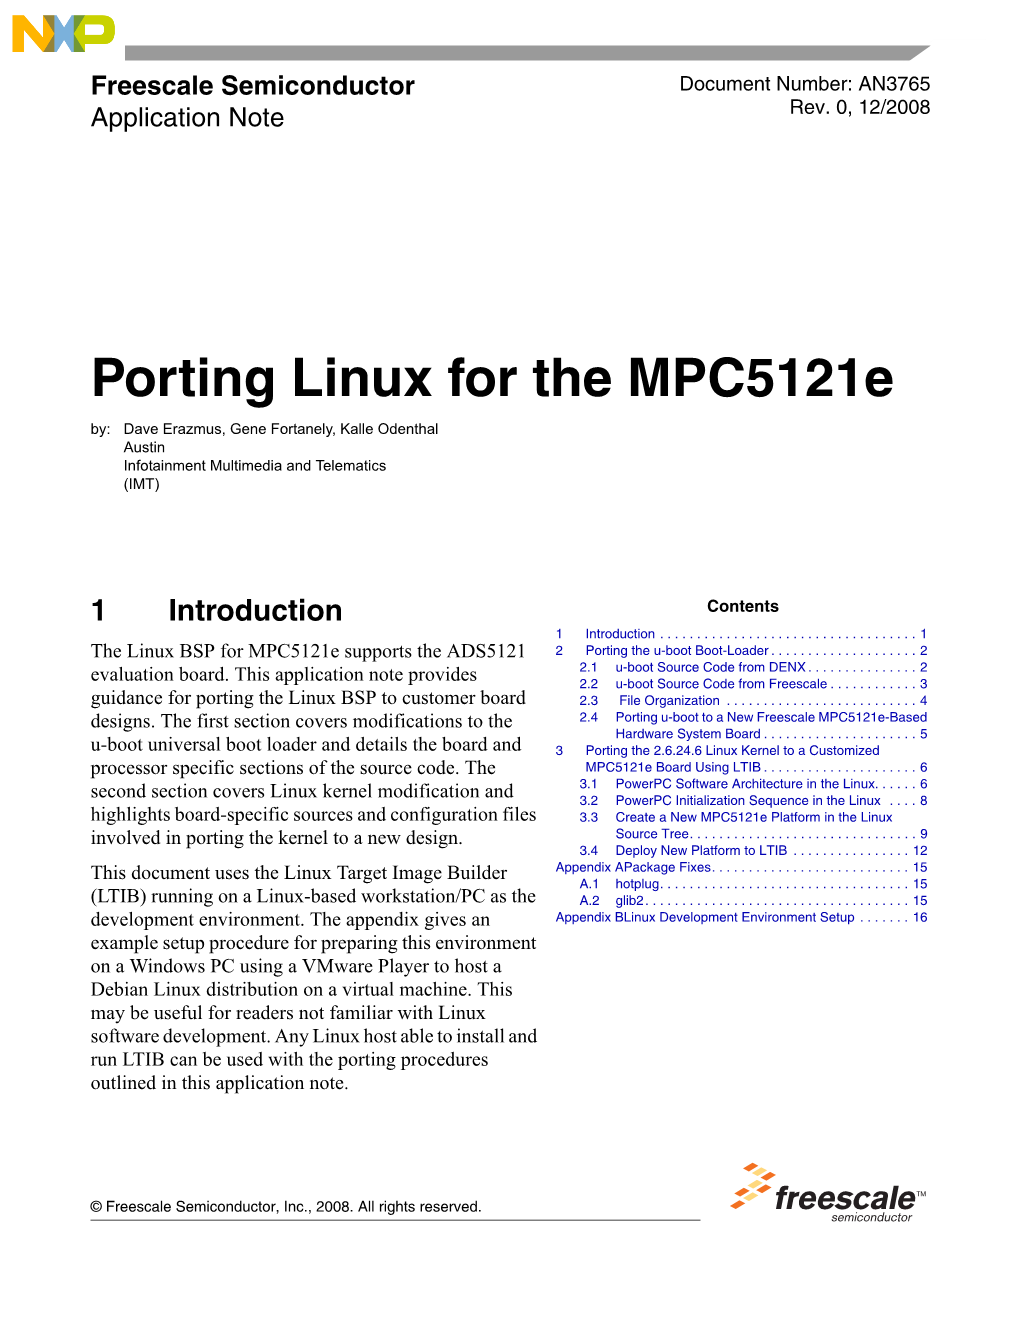 AN3765, Porting Linux for the Mpc5121e